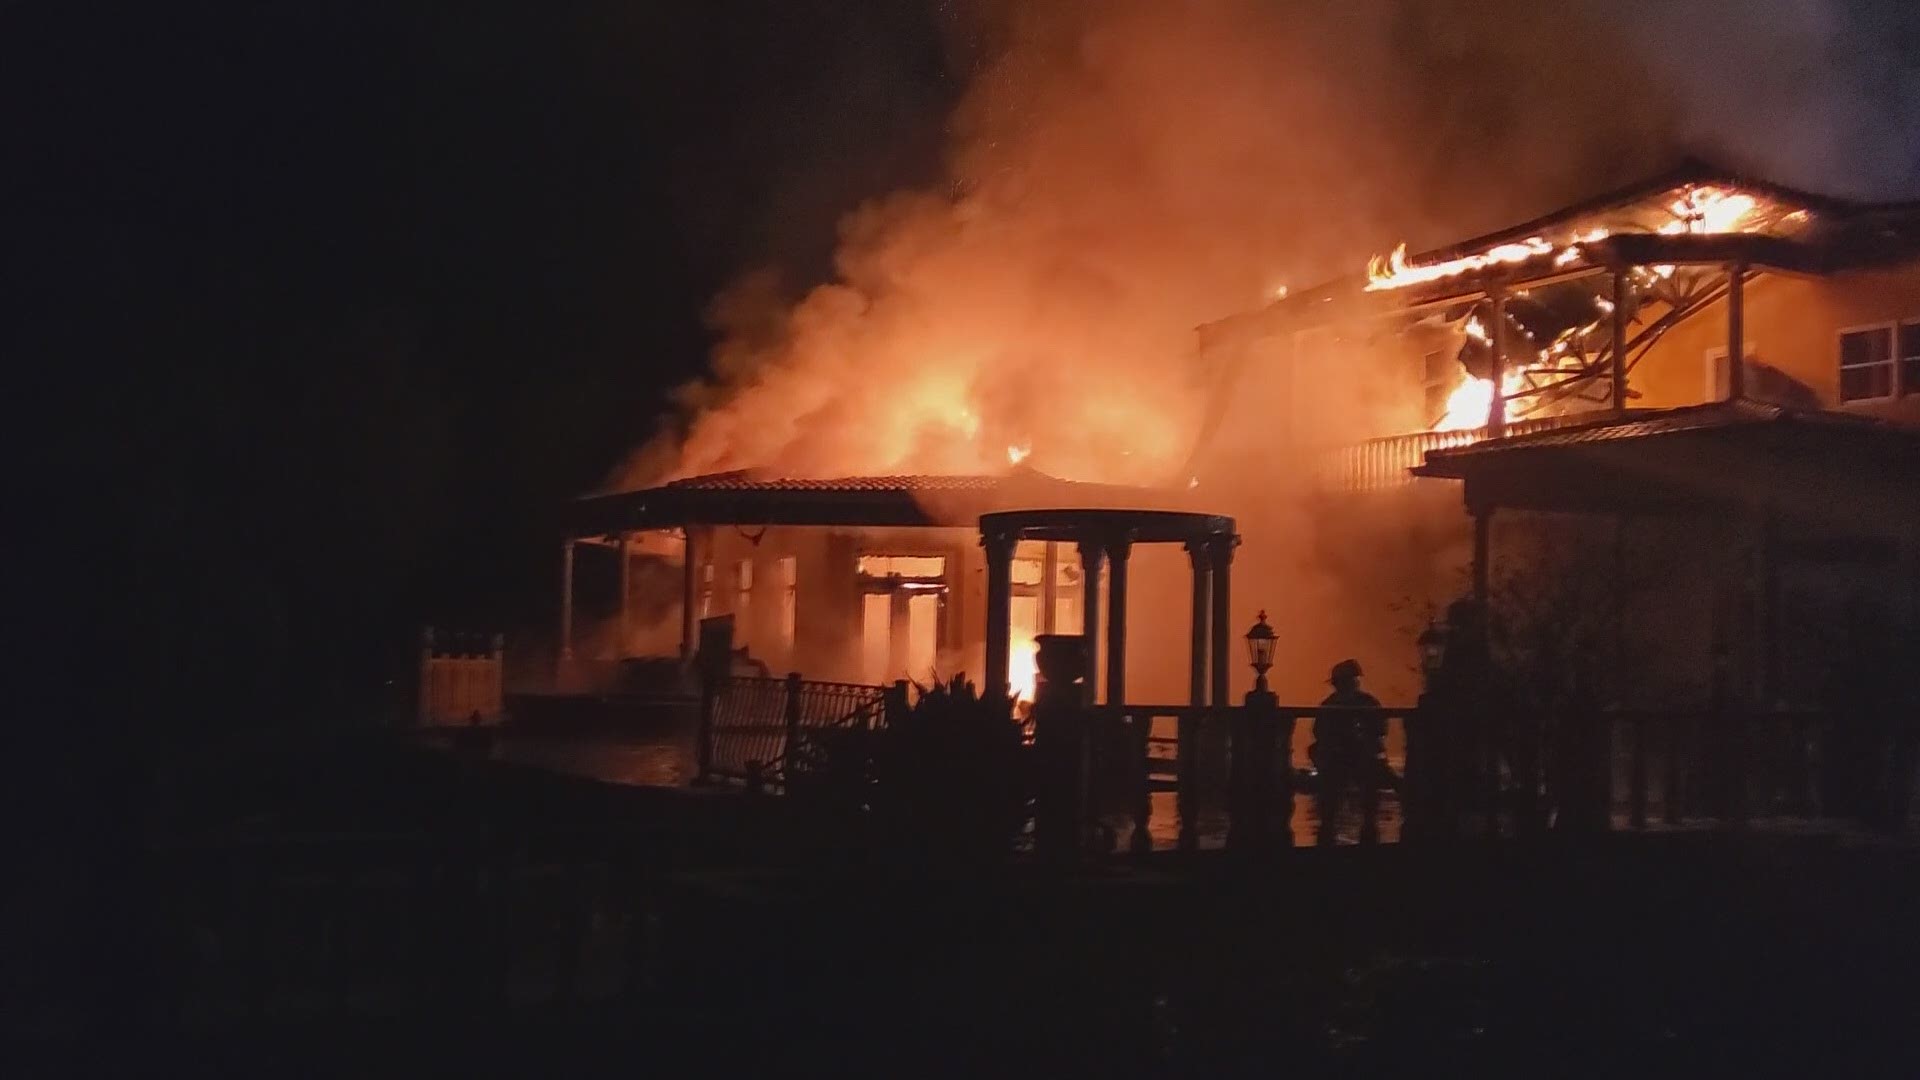 Firefighters were called to a home in Oldsmar Monday night for a large house fire.